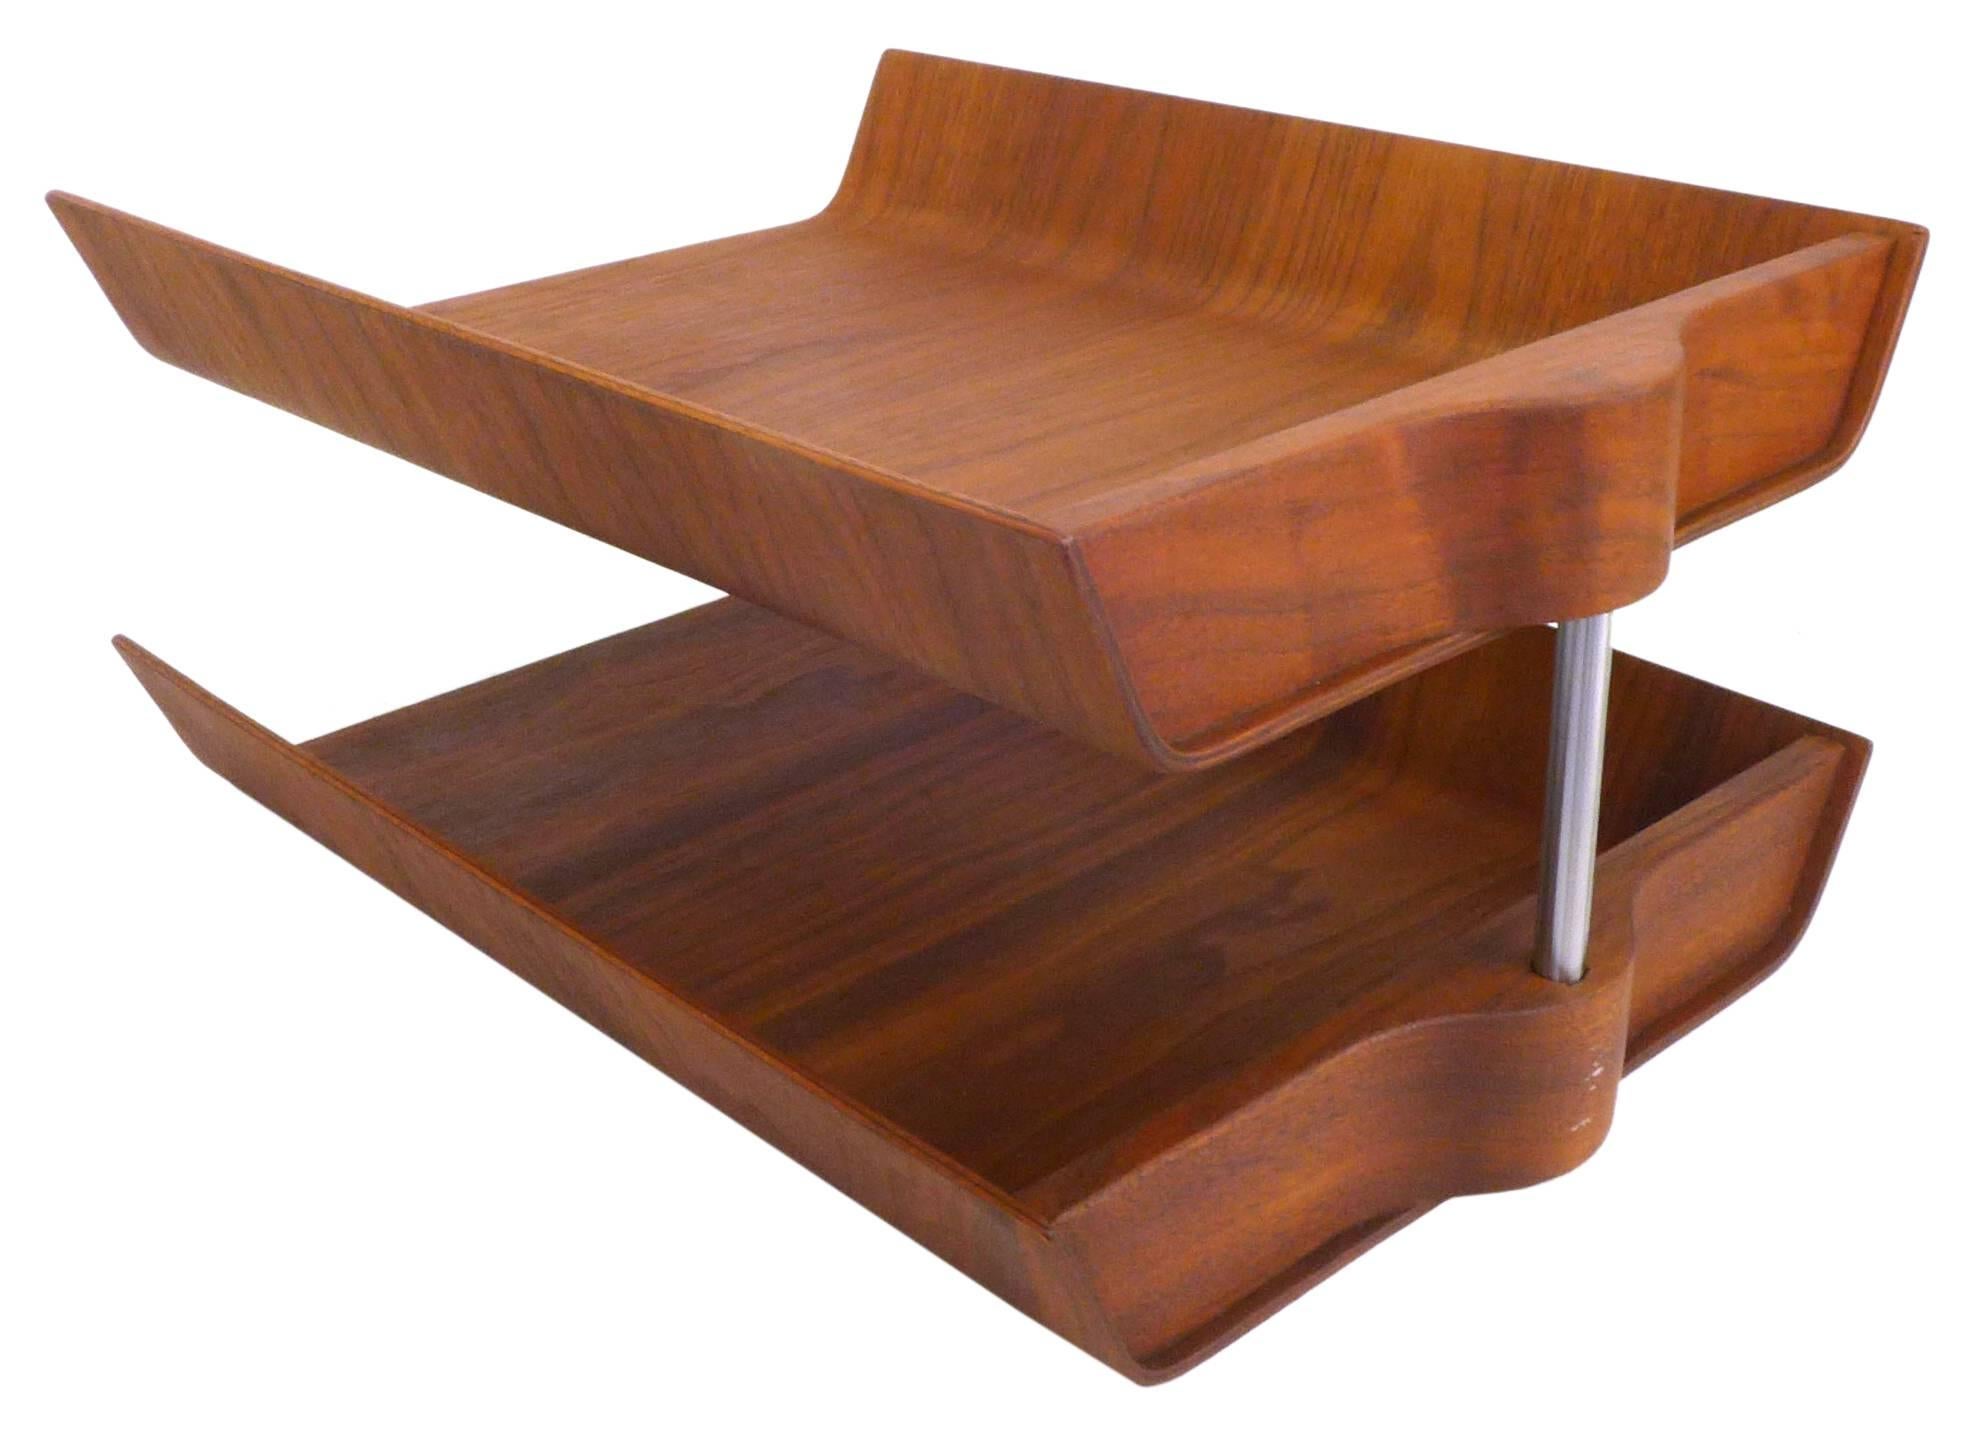 An architectural, two-tier, molded walnut plywood letter tray by Florence Knoll. An outstanding desk accessory as beautiful and iconic as it is practical. An American midcentury classic in wonderful original condition retaining Knoll label at the